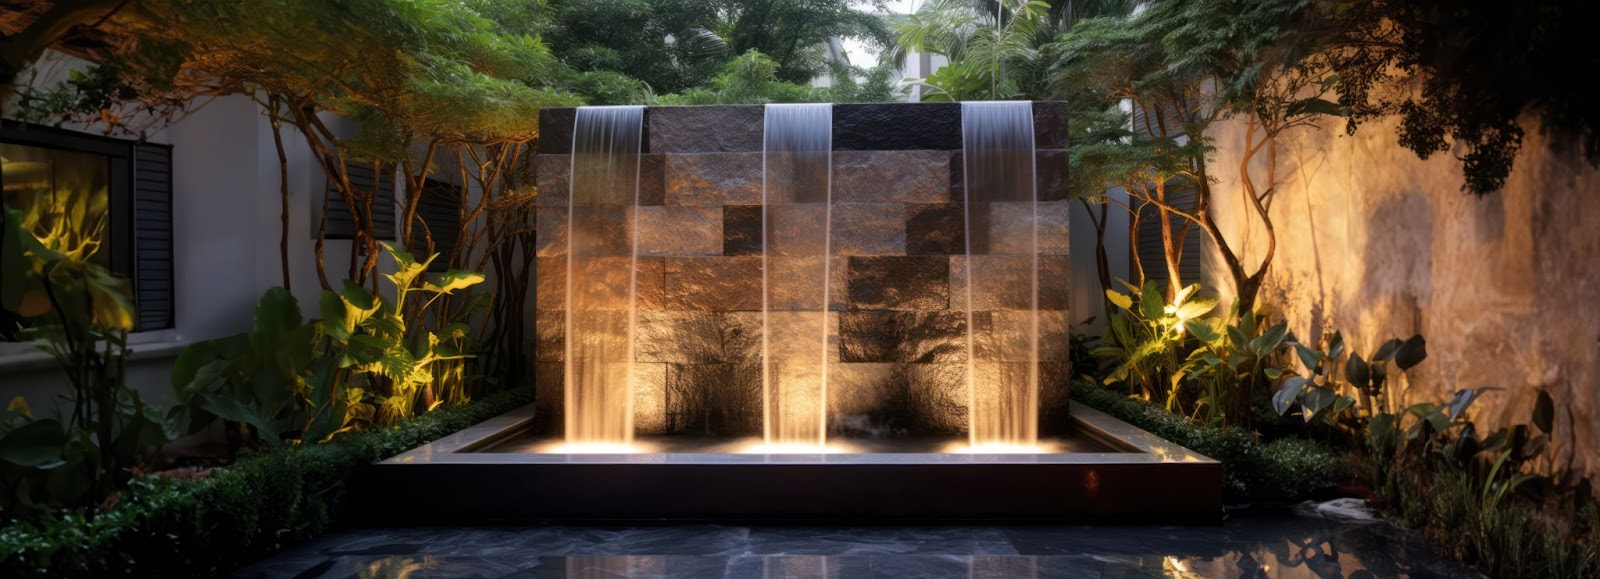 An outdoor waterfall with outdoor lighting in a garden.